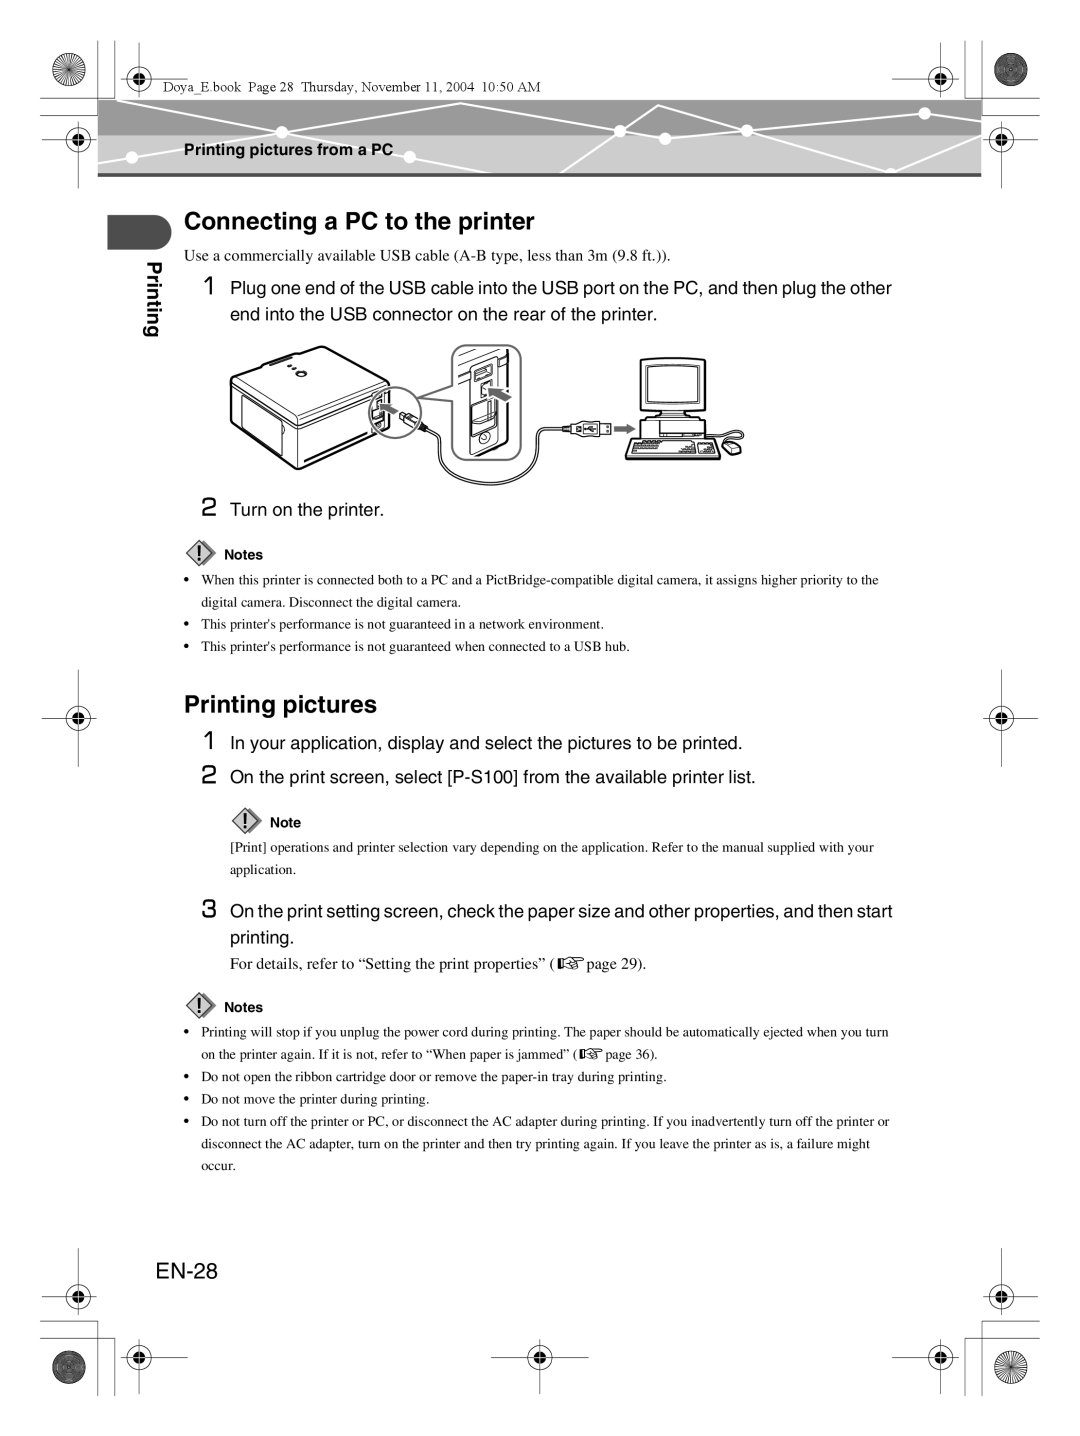 Olympus P-S100 user manual Connecting a PC to the printer, EN-28, Printing pictures from a PC 